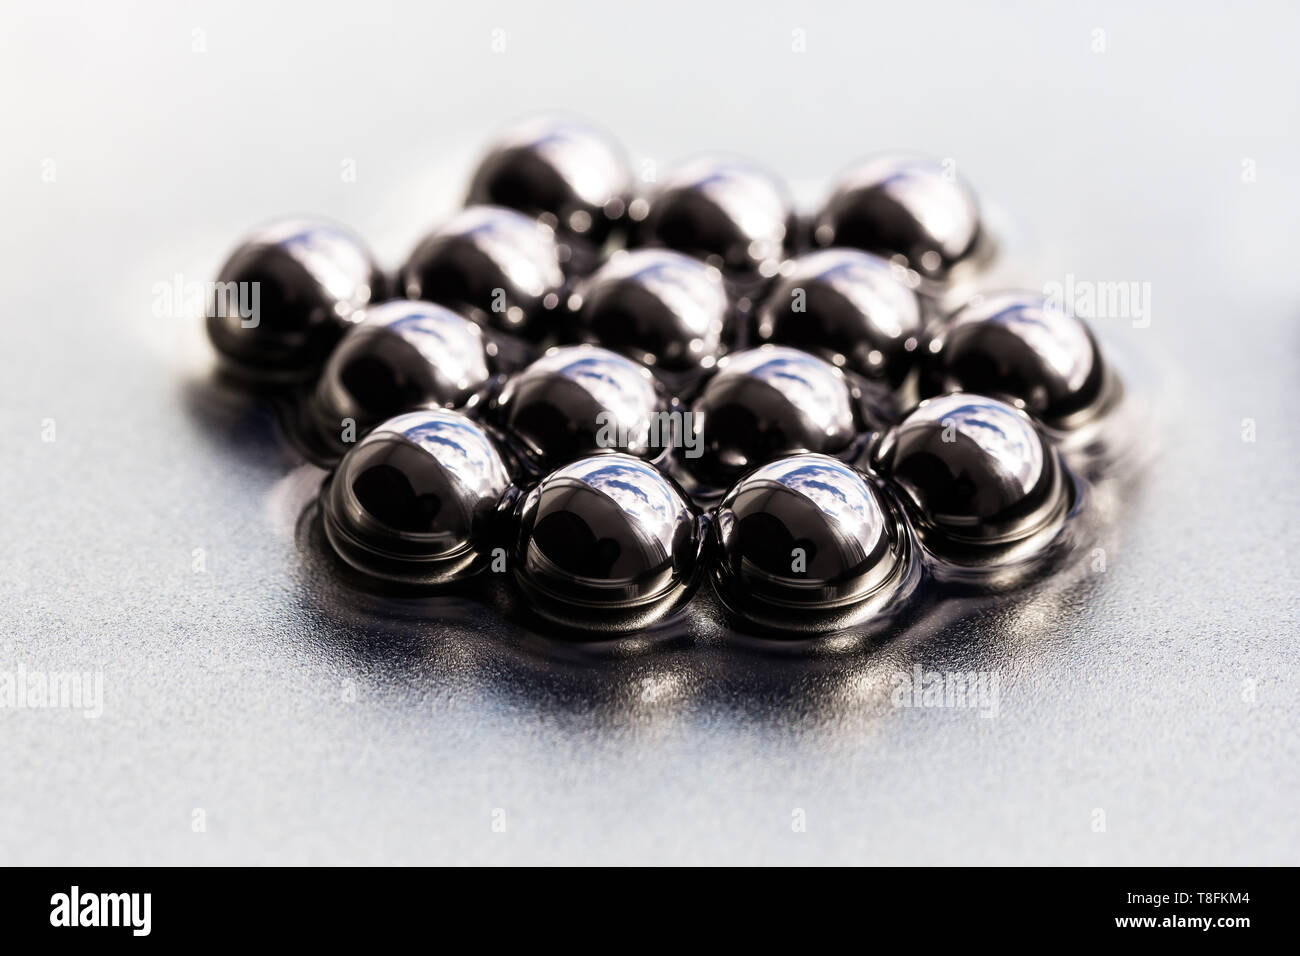 Steel balls with the sky reflected in them, in a liquid on a silver base Stock Photo